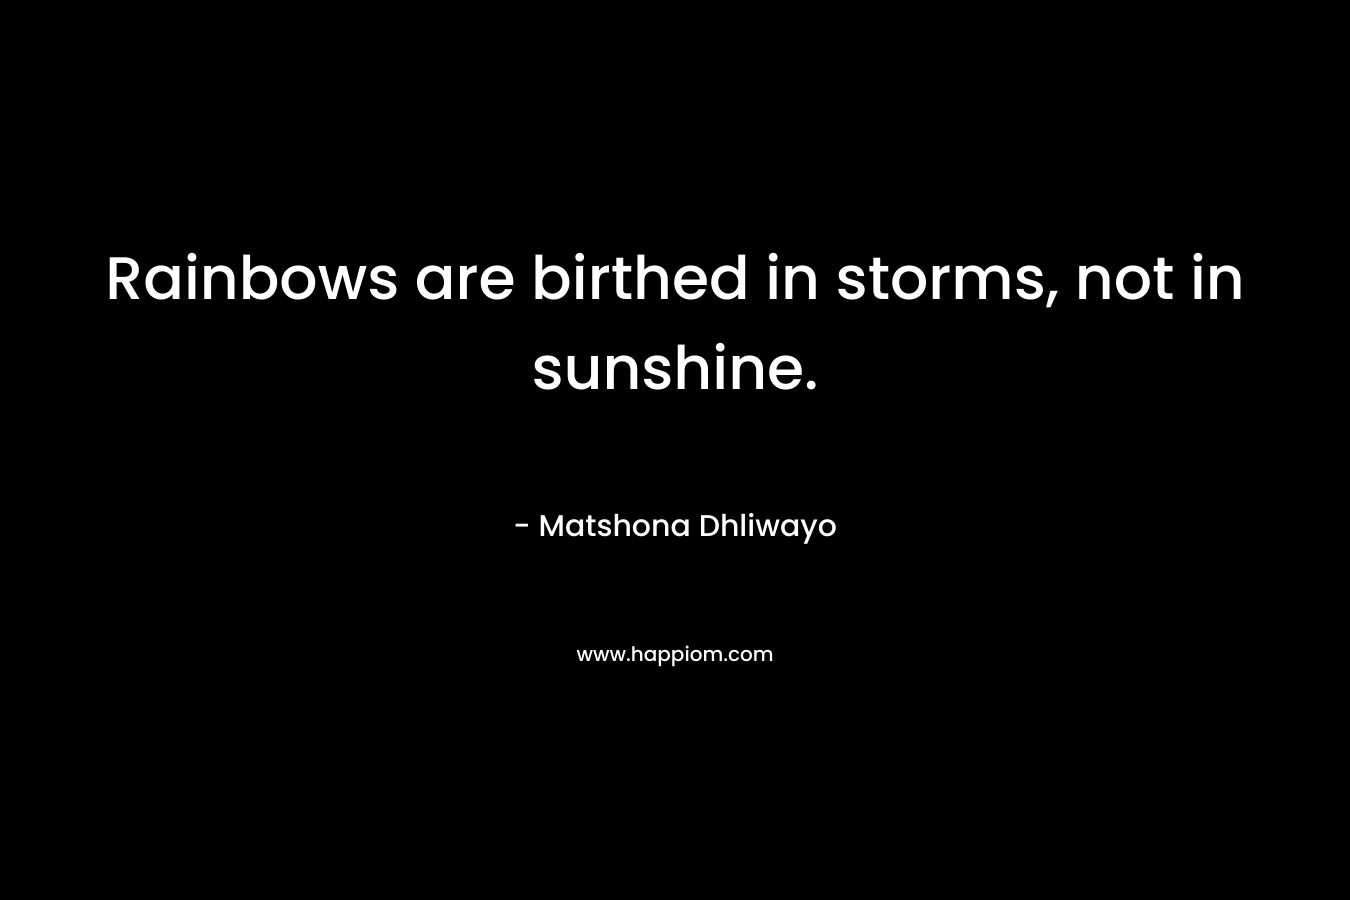 Rainbows are birthed in storms, not in sunshine.